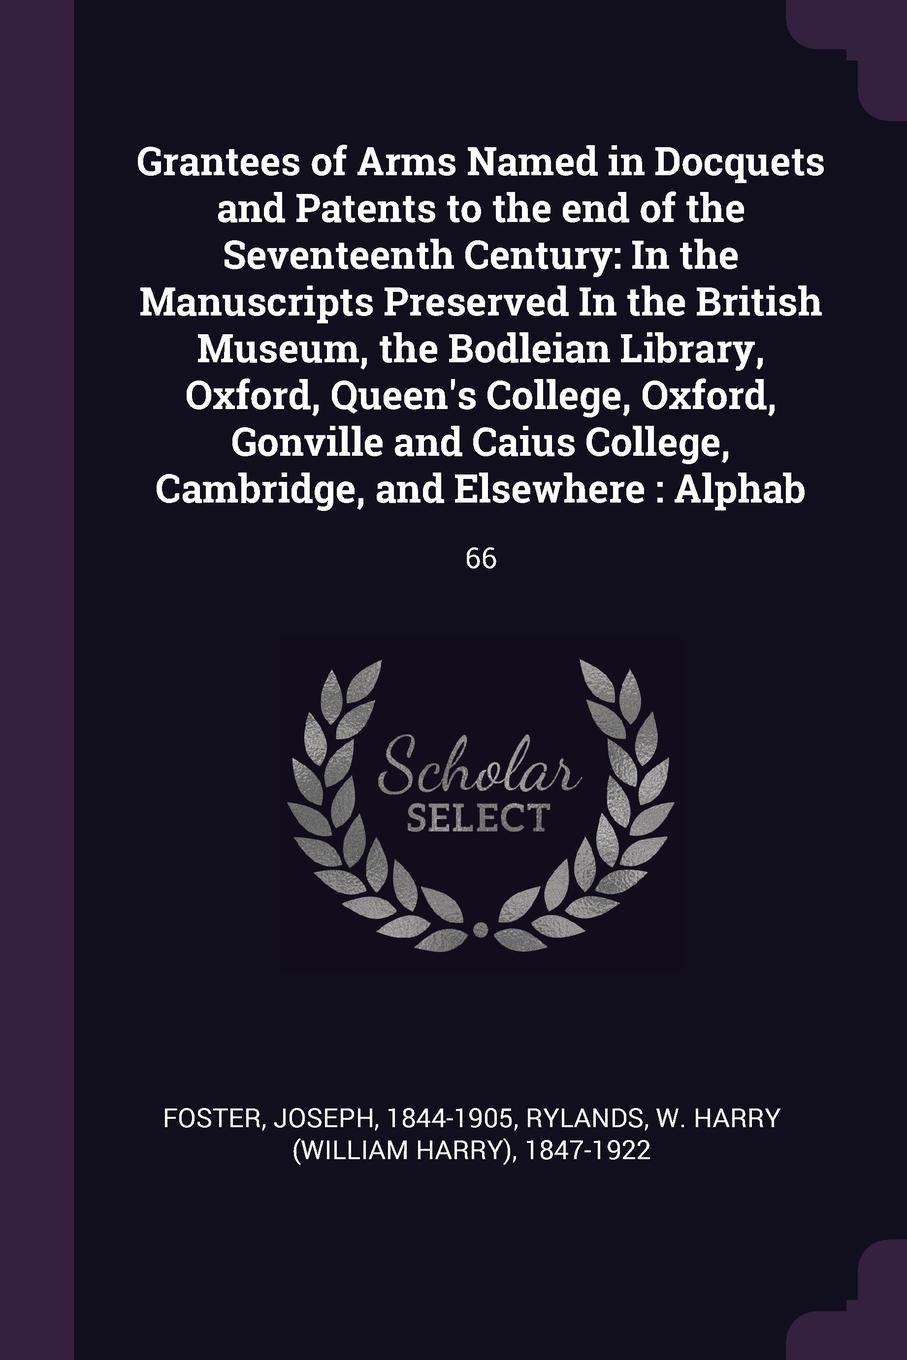 Grantees of Arms Named in Docquets and Patents to the end of the Seventeenth Century. In the Manuscripts Preserved In the British Museum, the Bodleian Library, Oxford, Queen`s College, Oxford, Gonville and Caius College, Cambridge, and Elsewhere :...